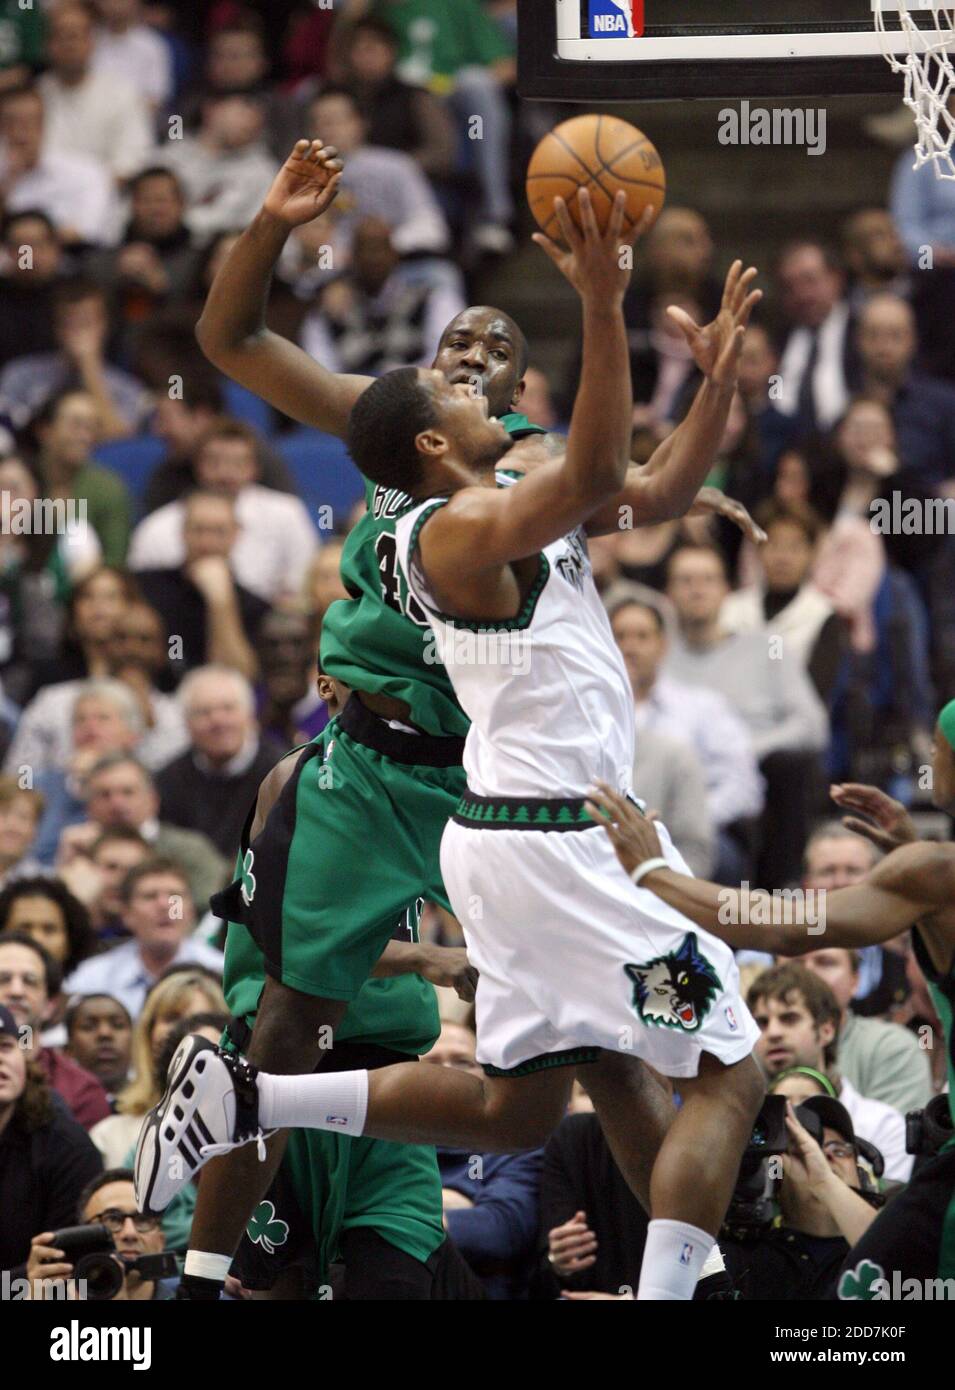 NO FILM, NO VIDEO, NO TV, NO DOCUMENTARY - The Minnesota Timberwolves' Ryan  Gomes gets a shot off over the defense of the Boston Celtics' Kendrick  Perkins in the first quarter at